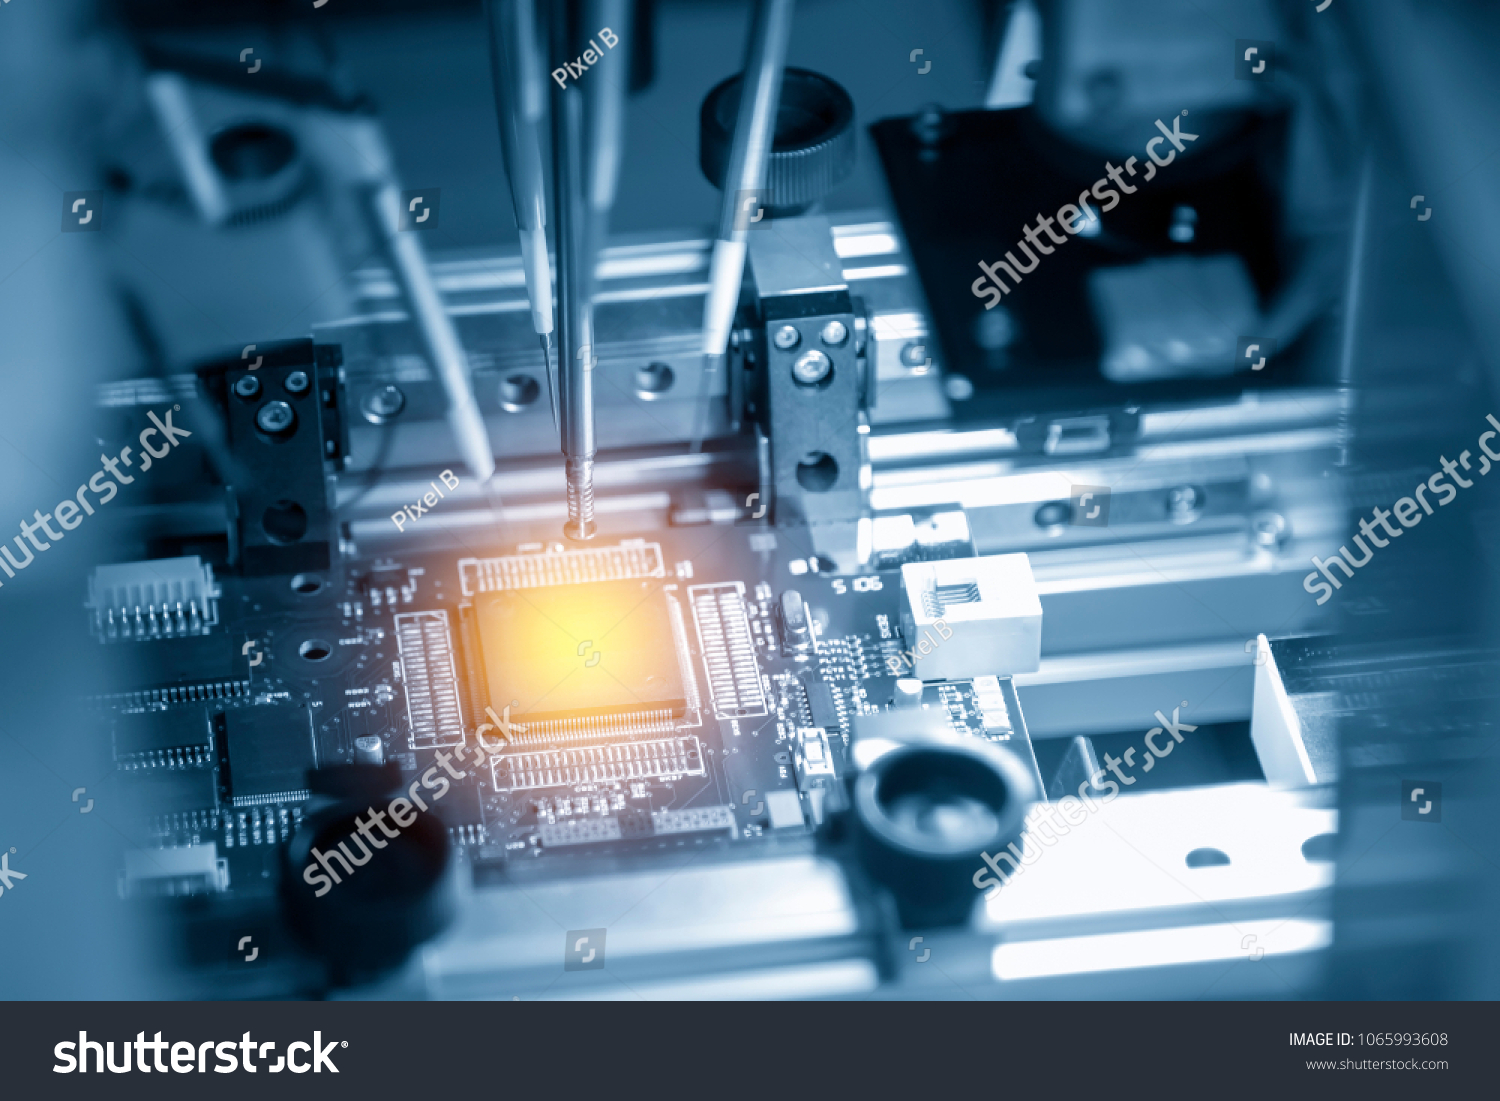 The microchip on the main board in the assembly line in the light blue scene with lighting effect, computer part manufacturing concept. #1065993608